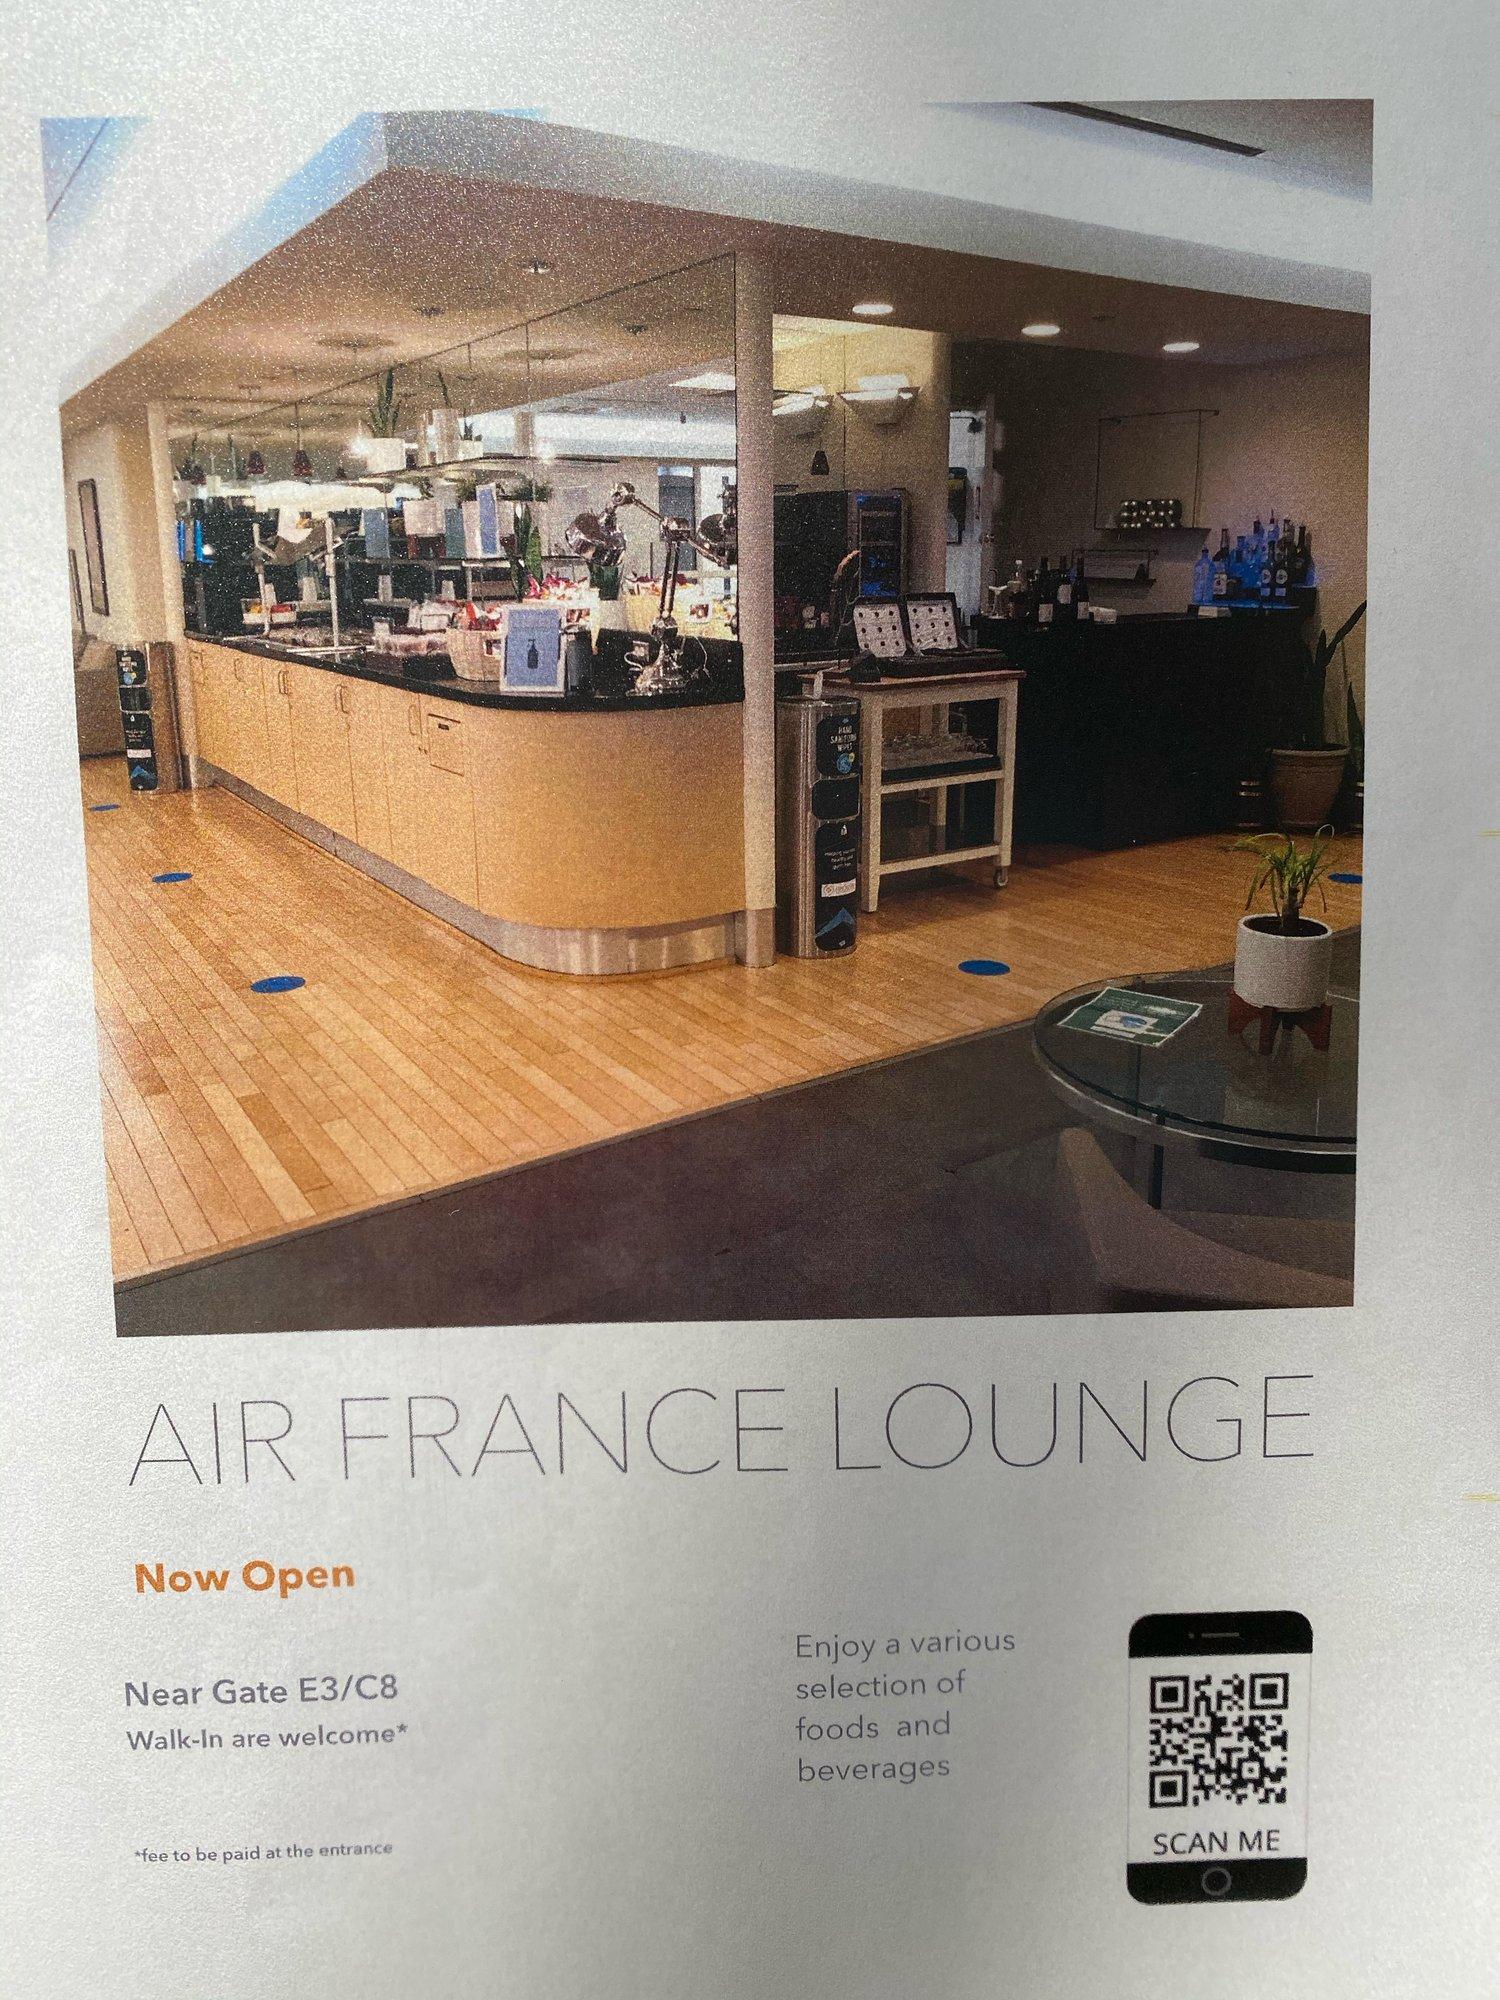 Air France Lounge image 26 of 26